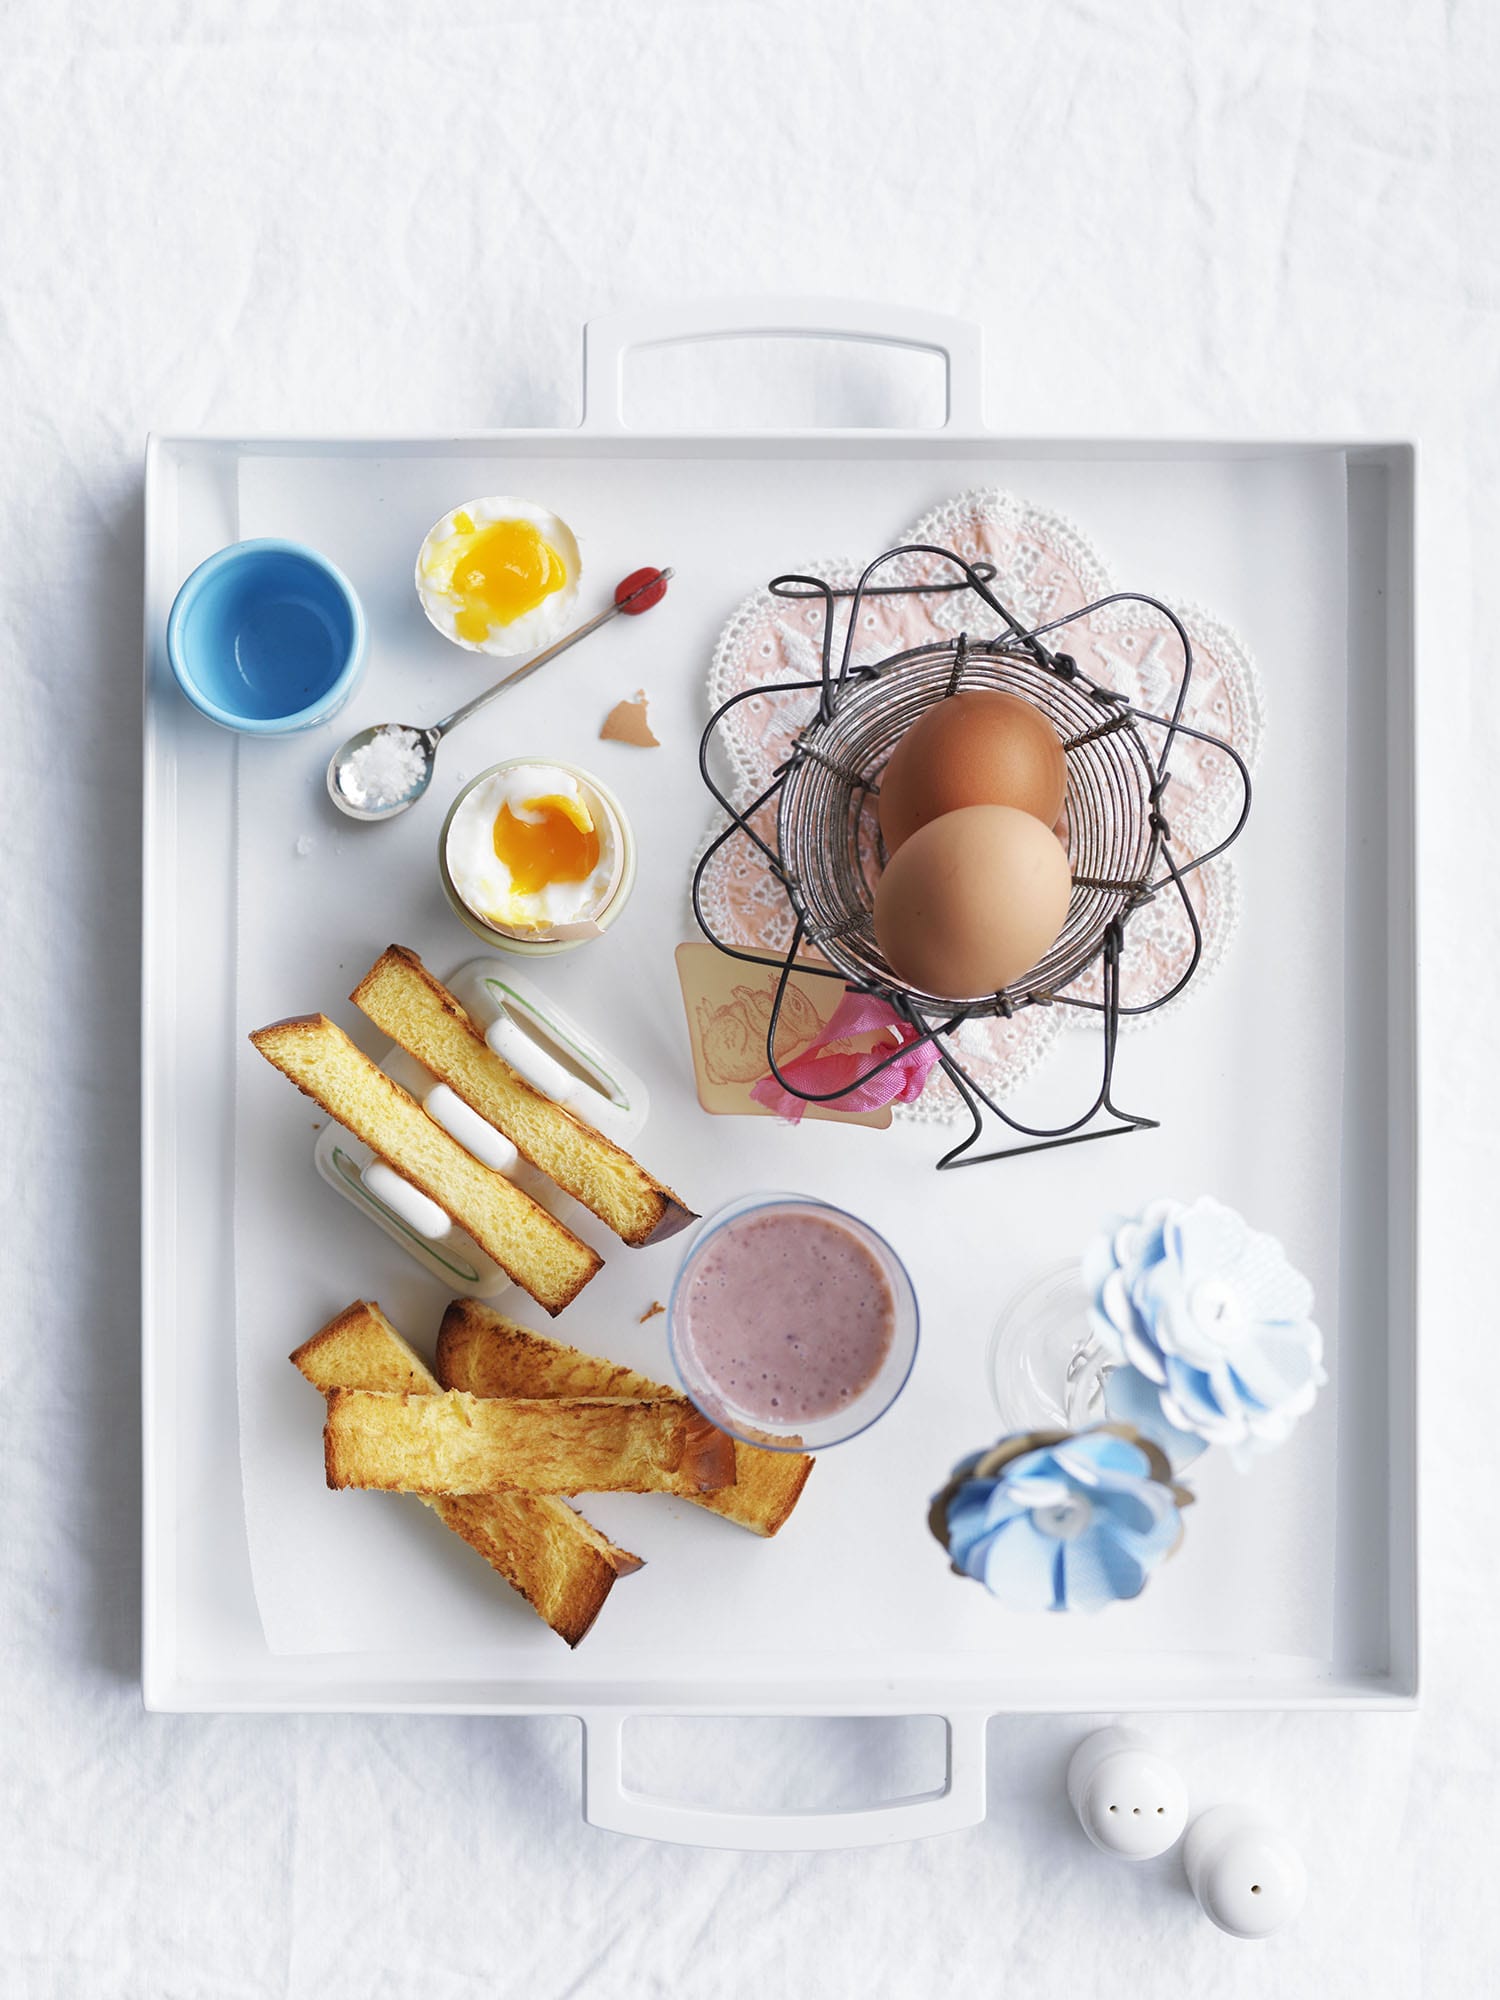 Soft-boiled eggs with brioche ‘soldiers’ and blueberry banana smoothie